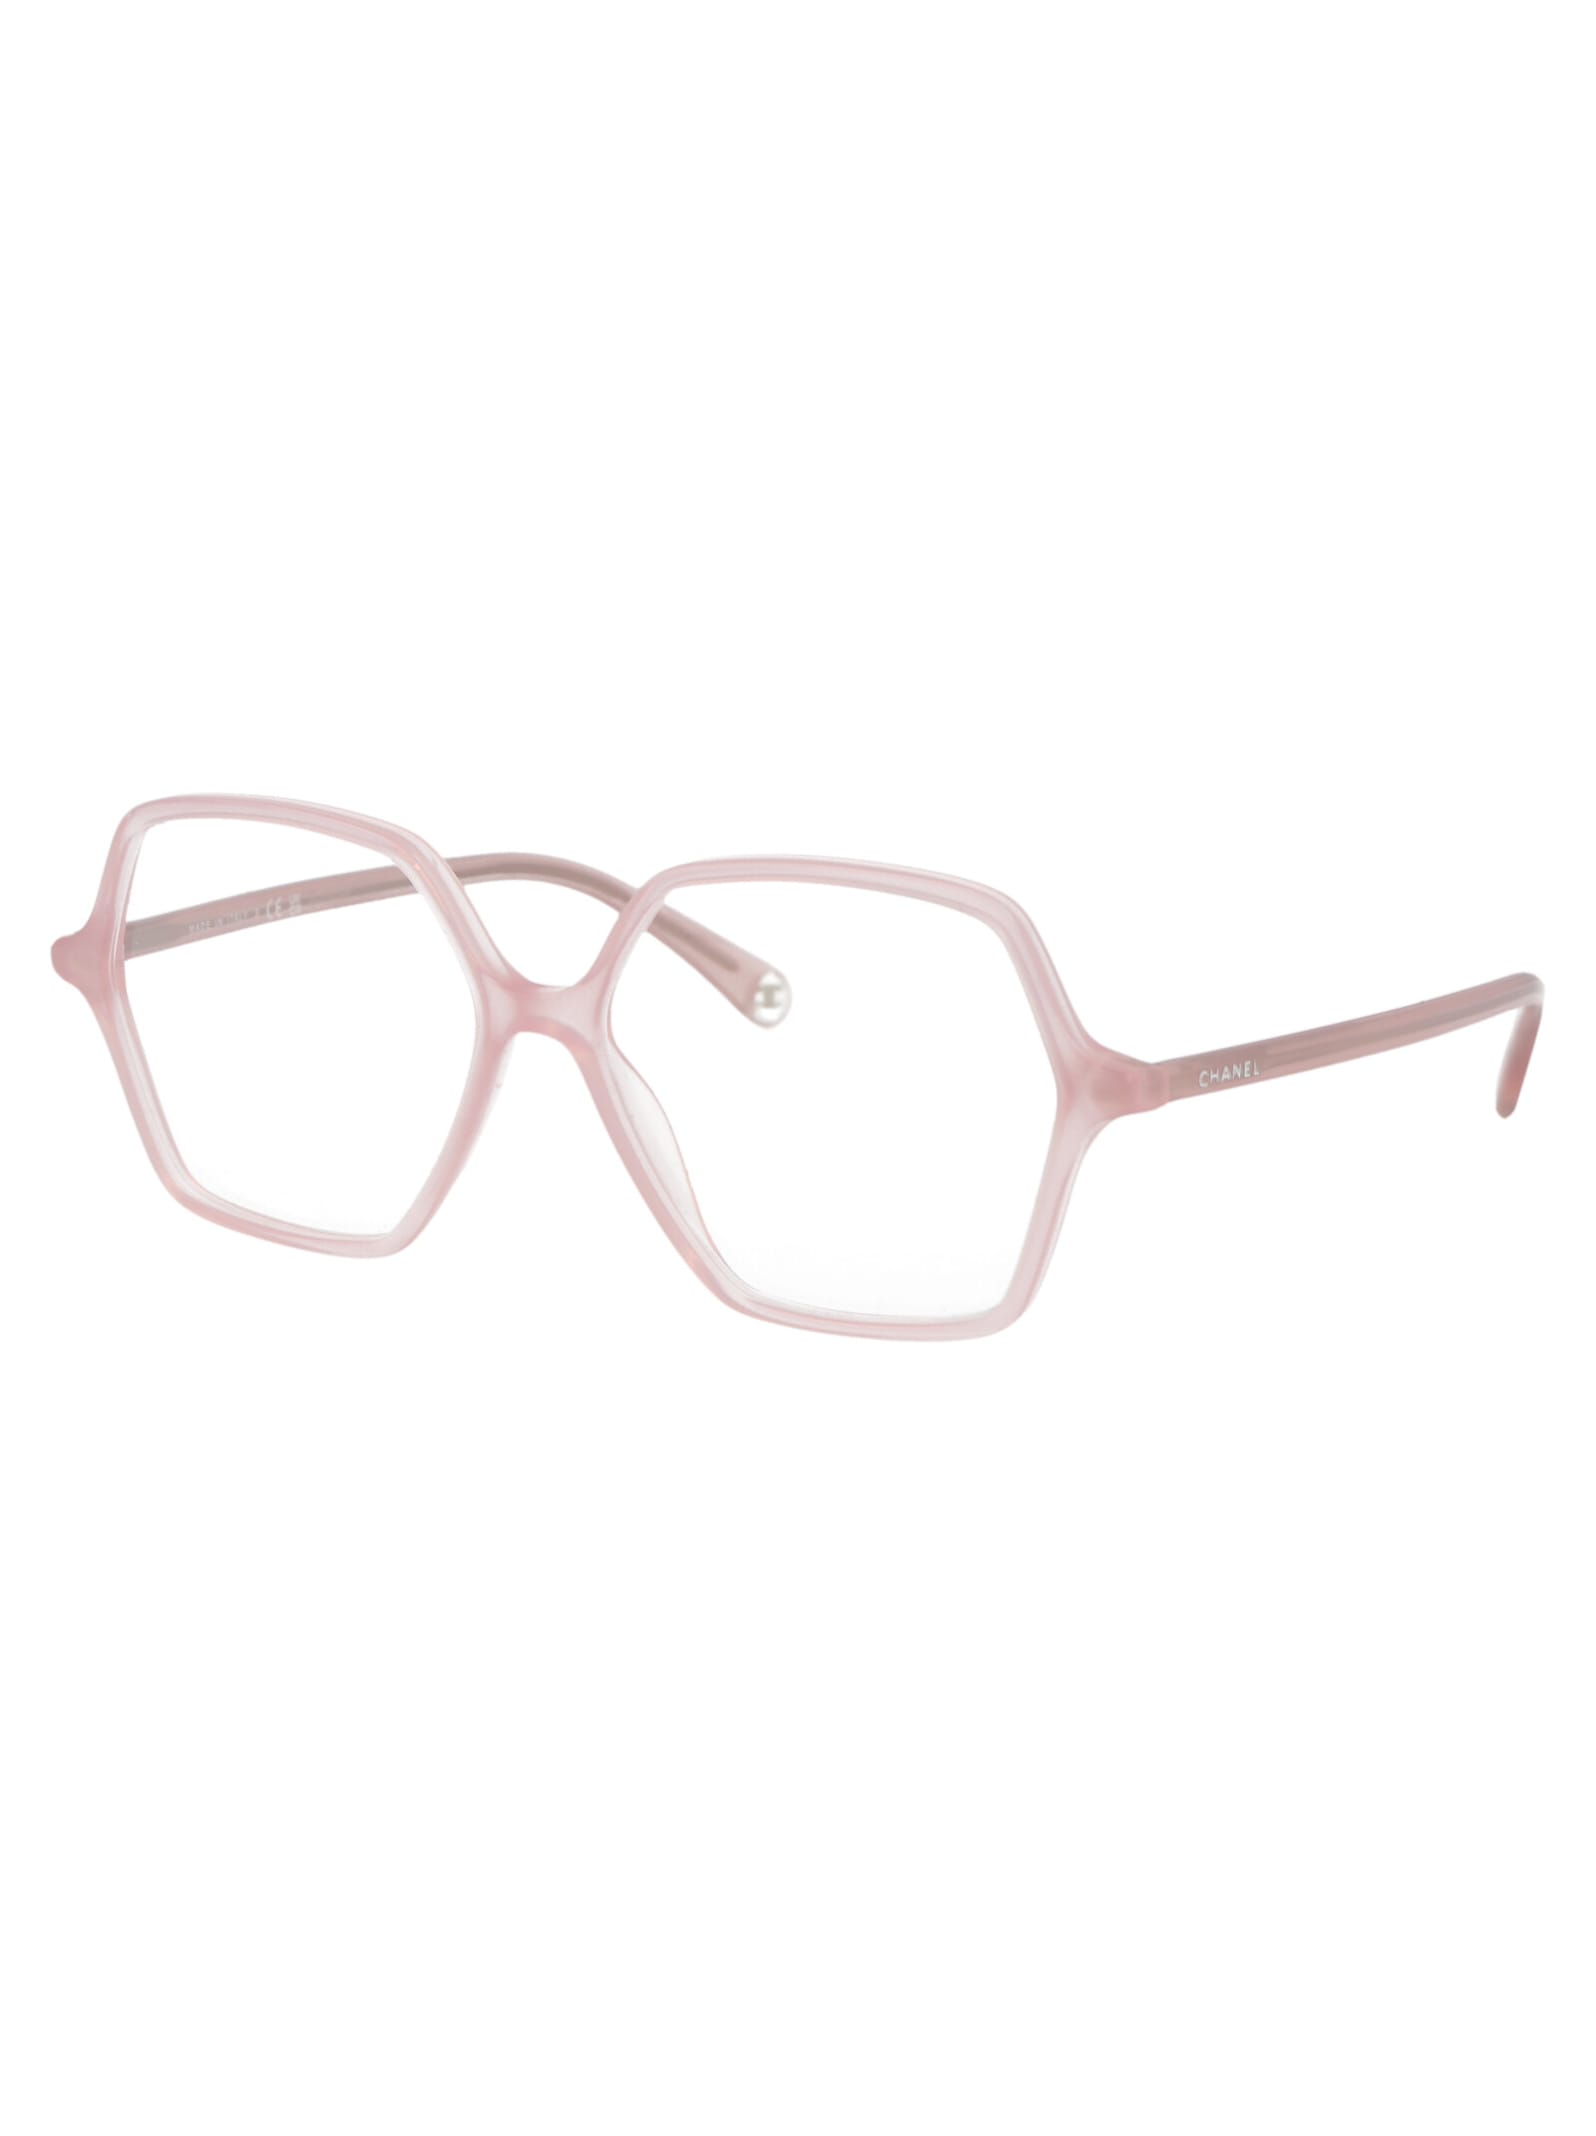 Pre-owned Chanel 0ch3447 Glasses In 1733 Pink